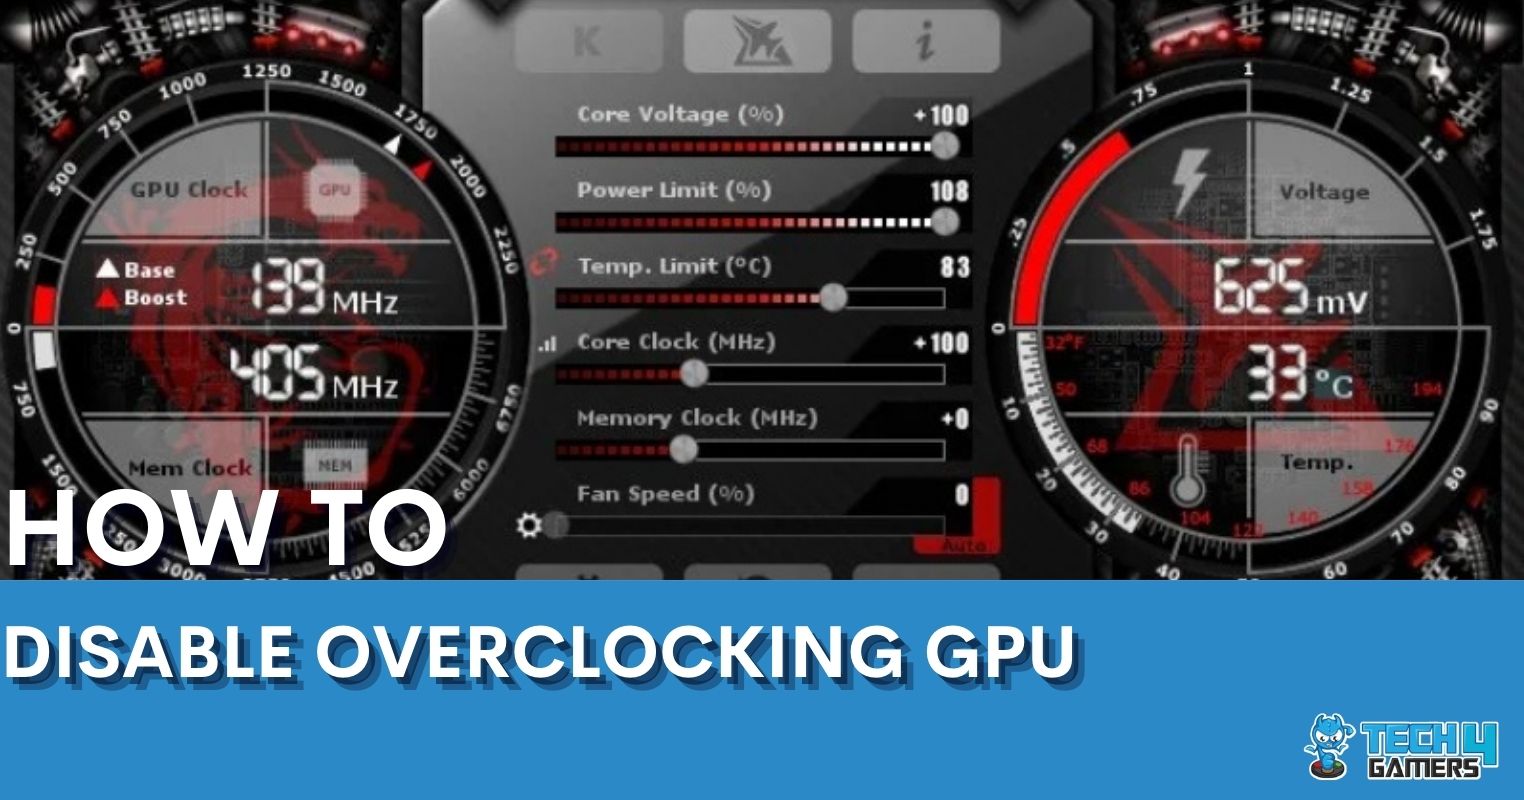 Disable overclocking: If you have overclocked your graphics card, revert it to its default settings as overclocking can sometimes lead to Video TDR Failures.
Remove and reinstall your graphics card: Physically remove the graphics card from your computer, clean the contacts, and reinsert it to ensure a proper connection.